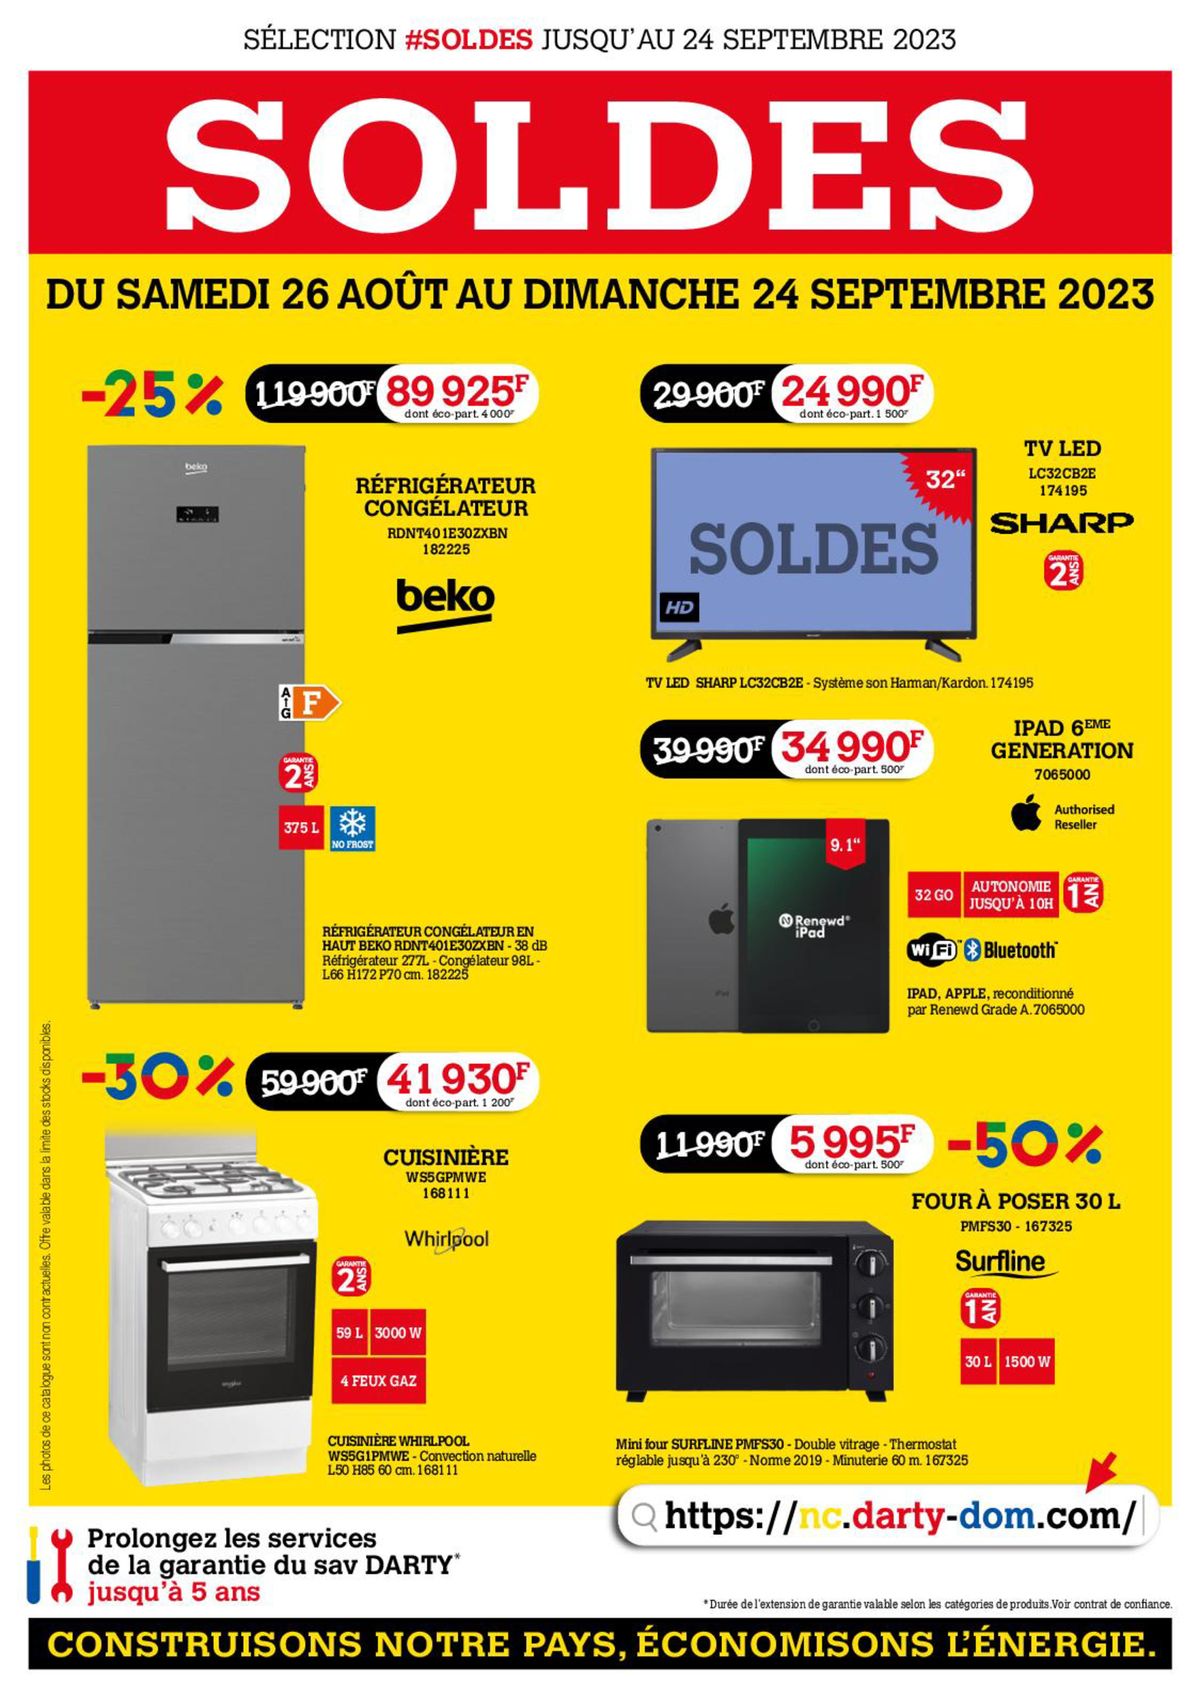 Catalogue Soldes Darty, page 00001